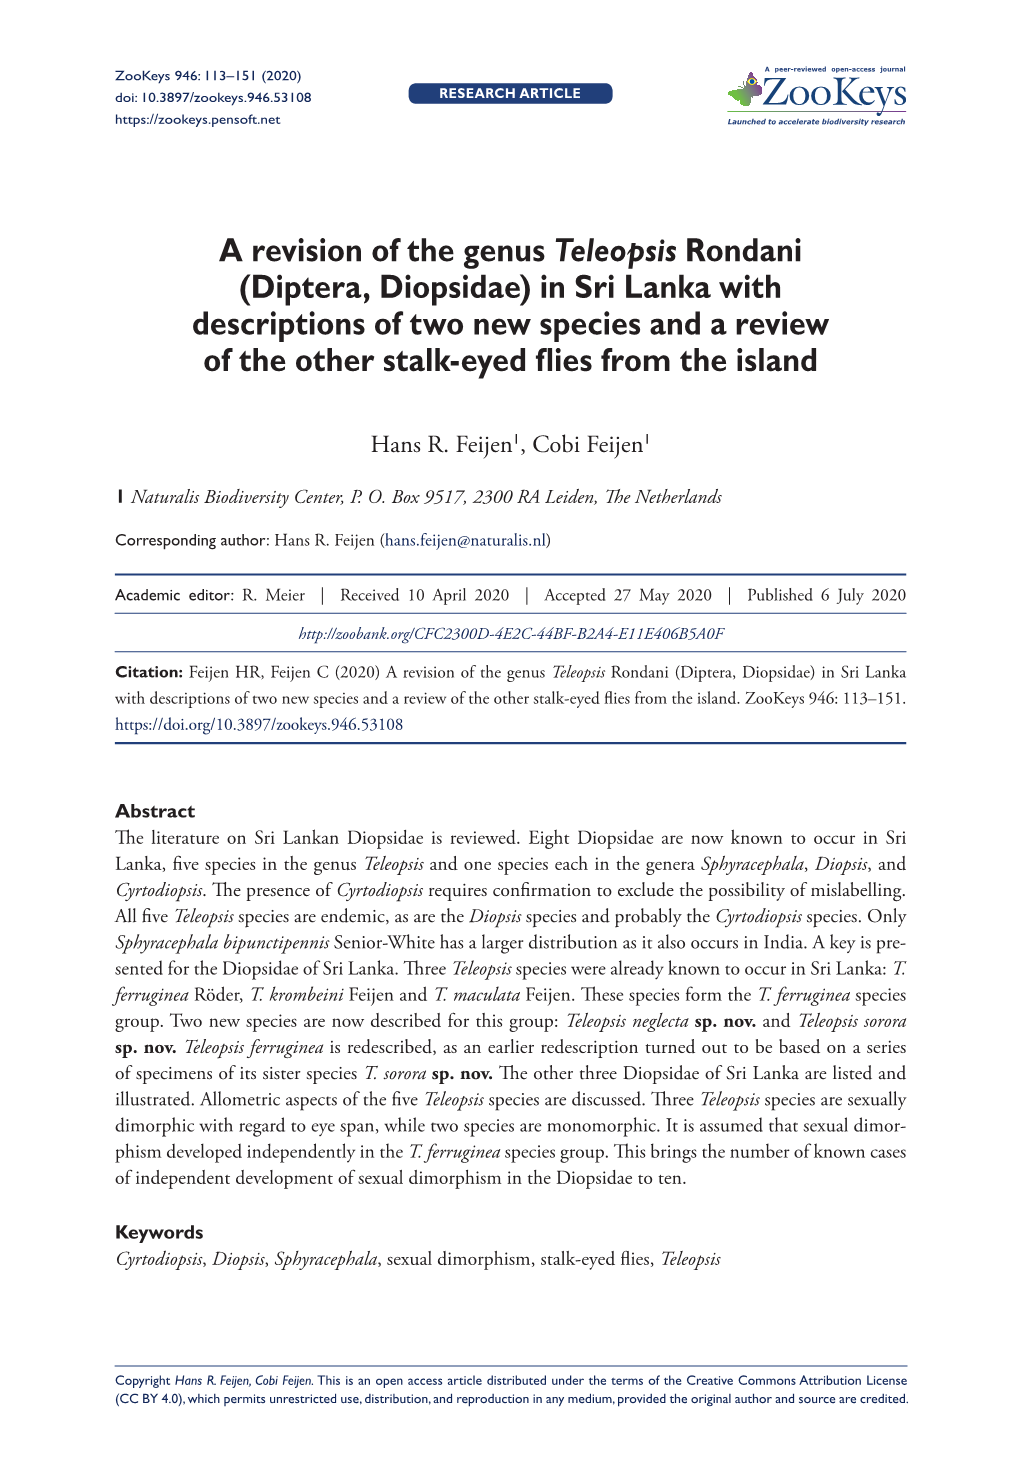 Diptera, Diopsidae) in Sri Lanka with Descriptions of Two New Species and a Review of the Other Stalk-Eyed Flies from the Island